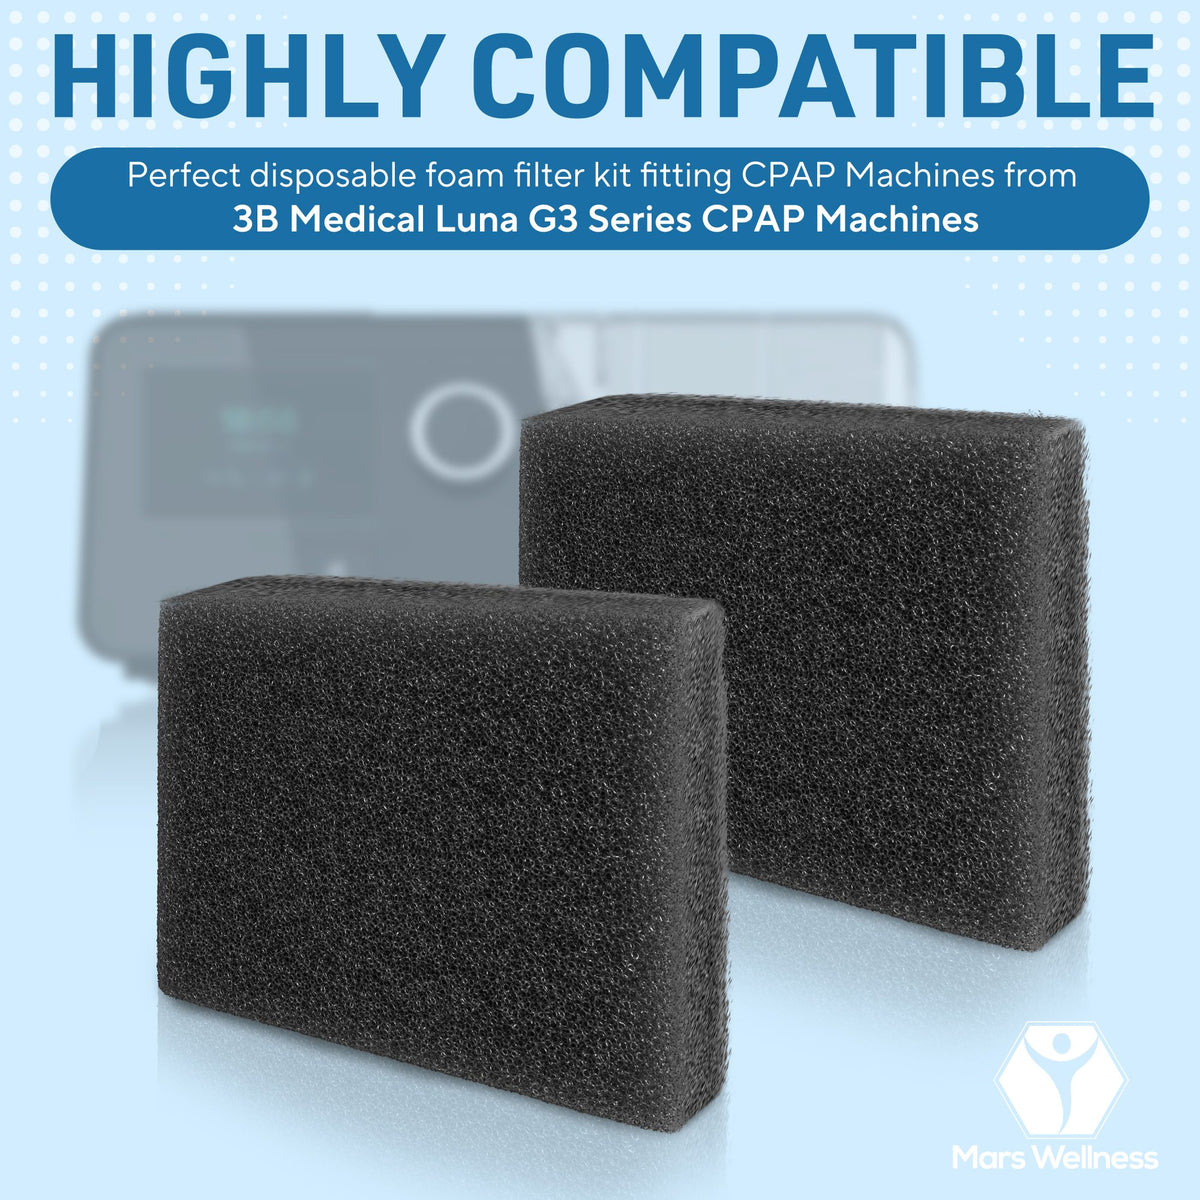 Mars Wellness CPAP Filter Kit - Compatible with 3B Medical Luna G3 Series CPAP Machines - Made in The USA